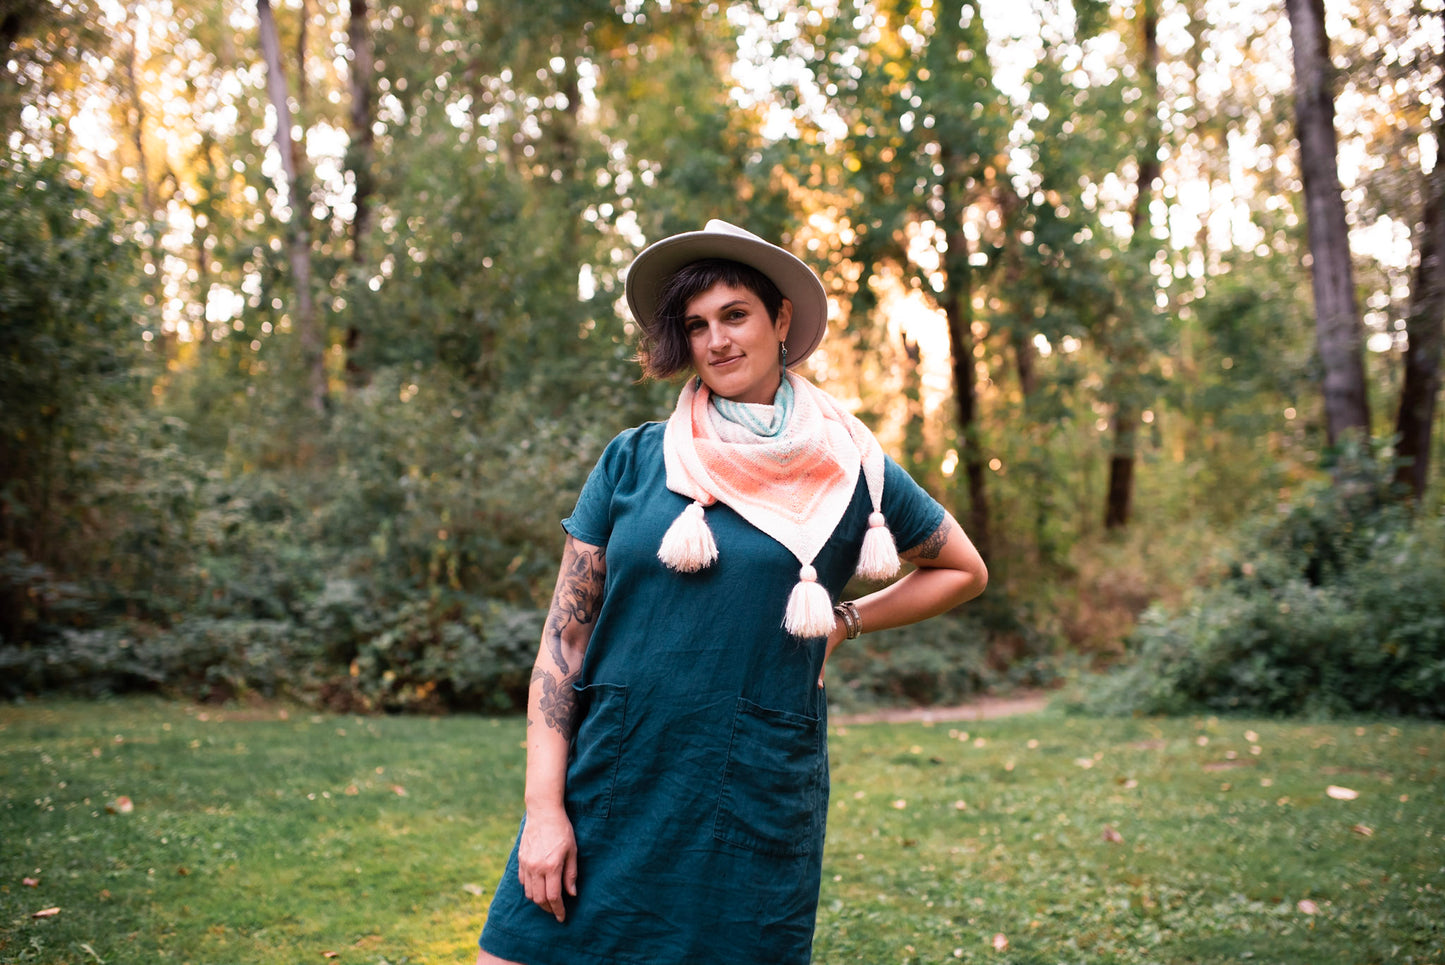 Standing in a park, Jen wears a pastel knit shawl with a blue dress and a white hat. The shawl has tassels at each corner. Trees can be seen in the background.